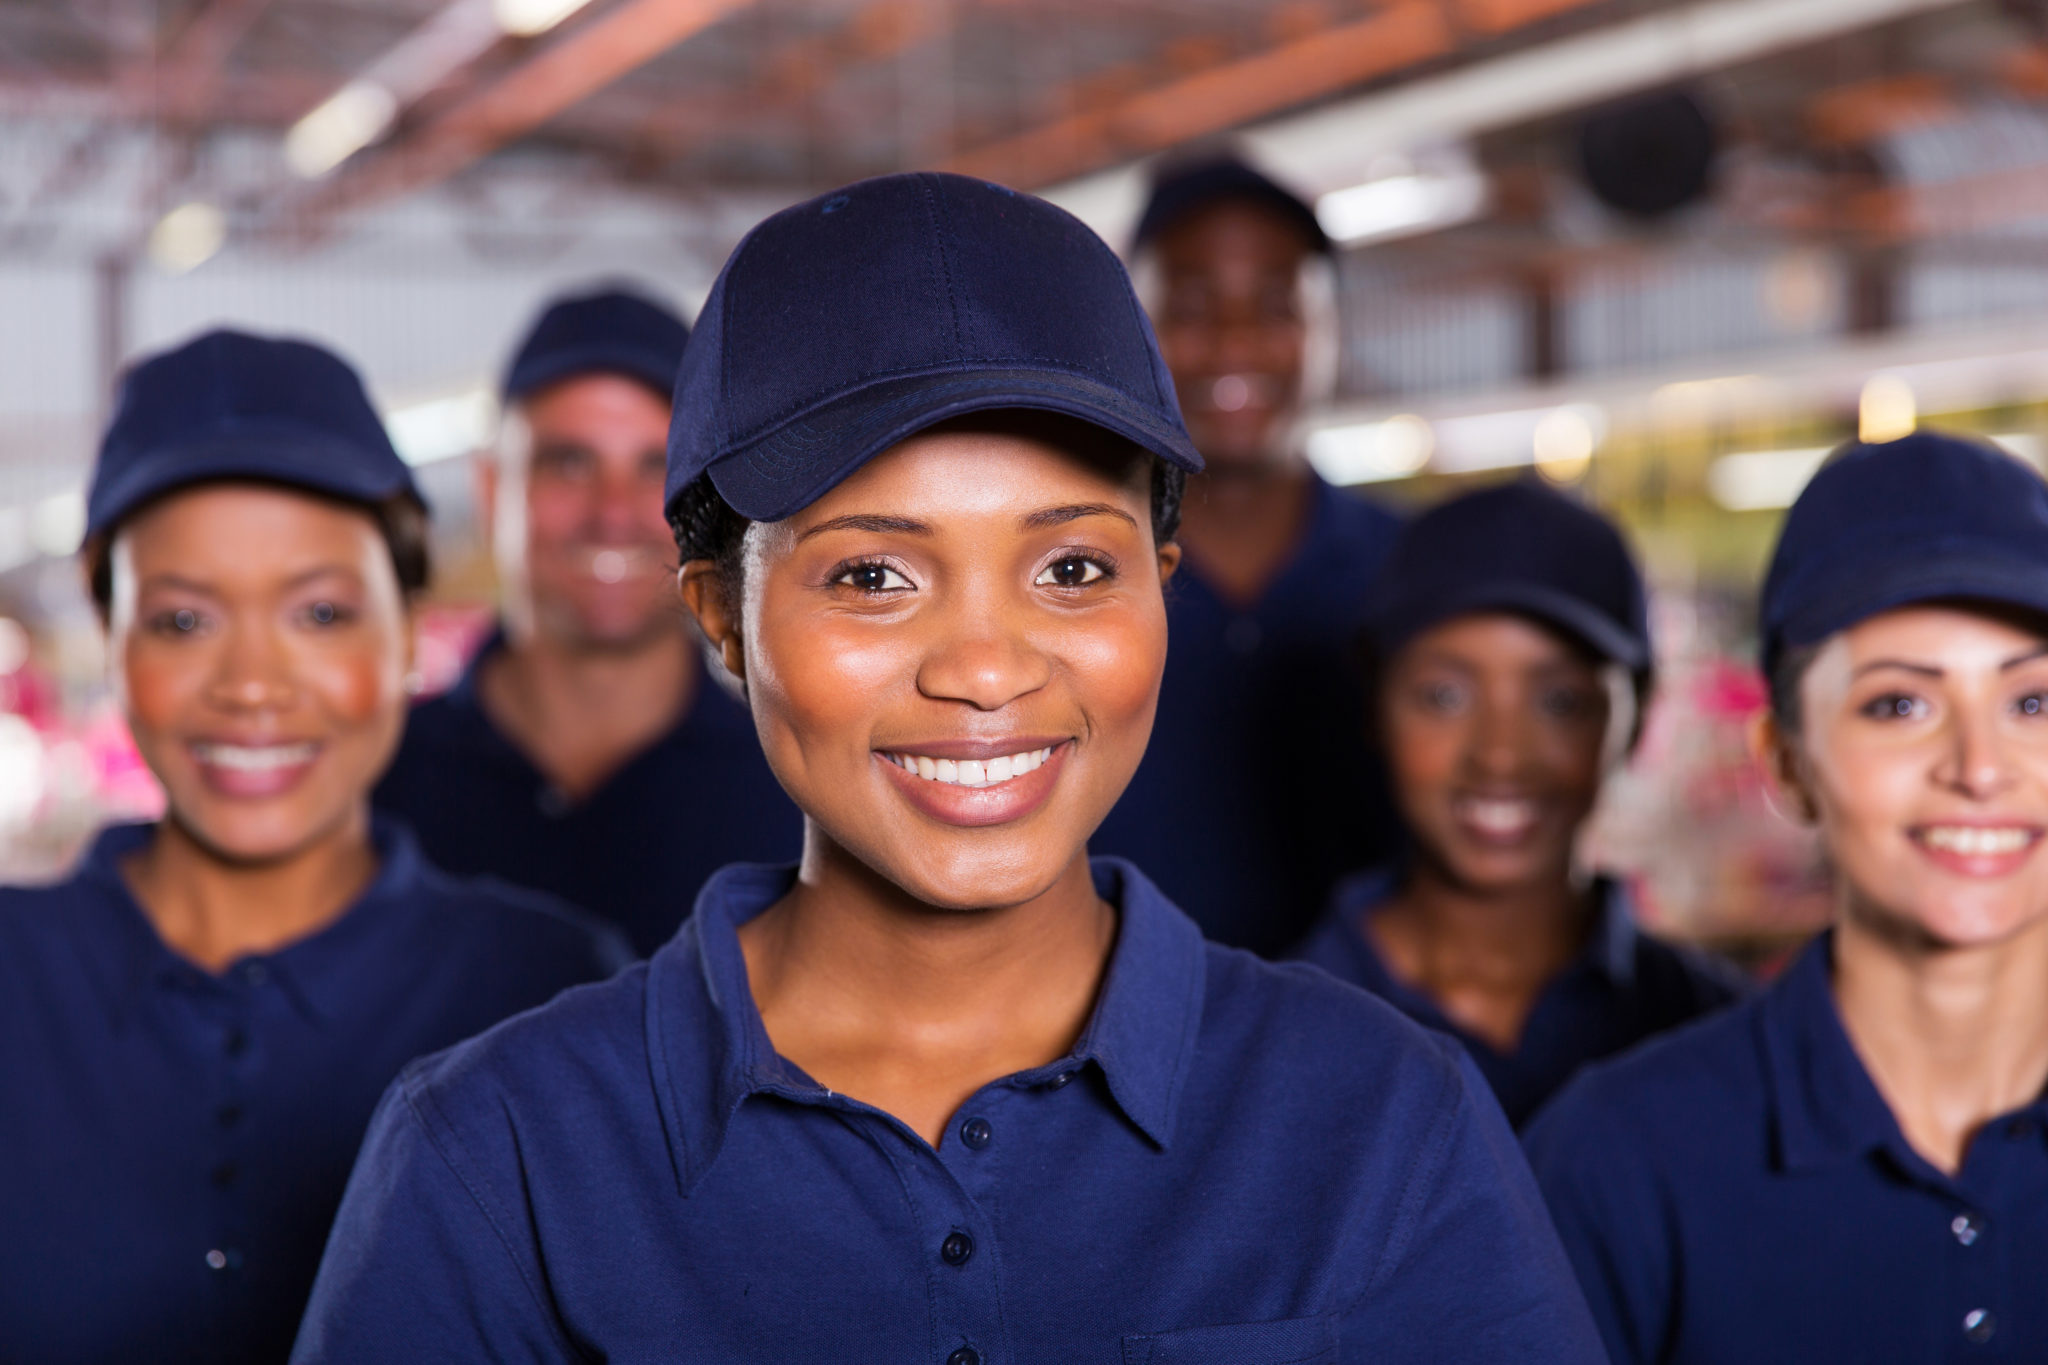 How To Encourage New Generations To Consider Careers In Manufacturing